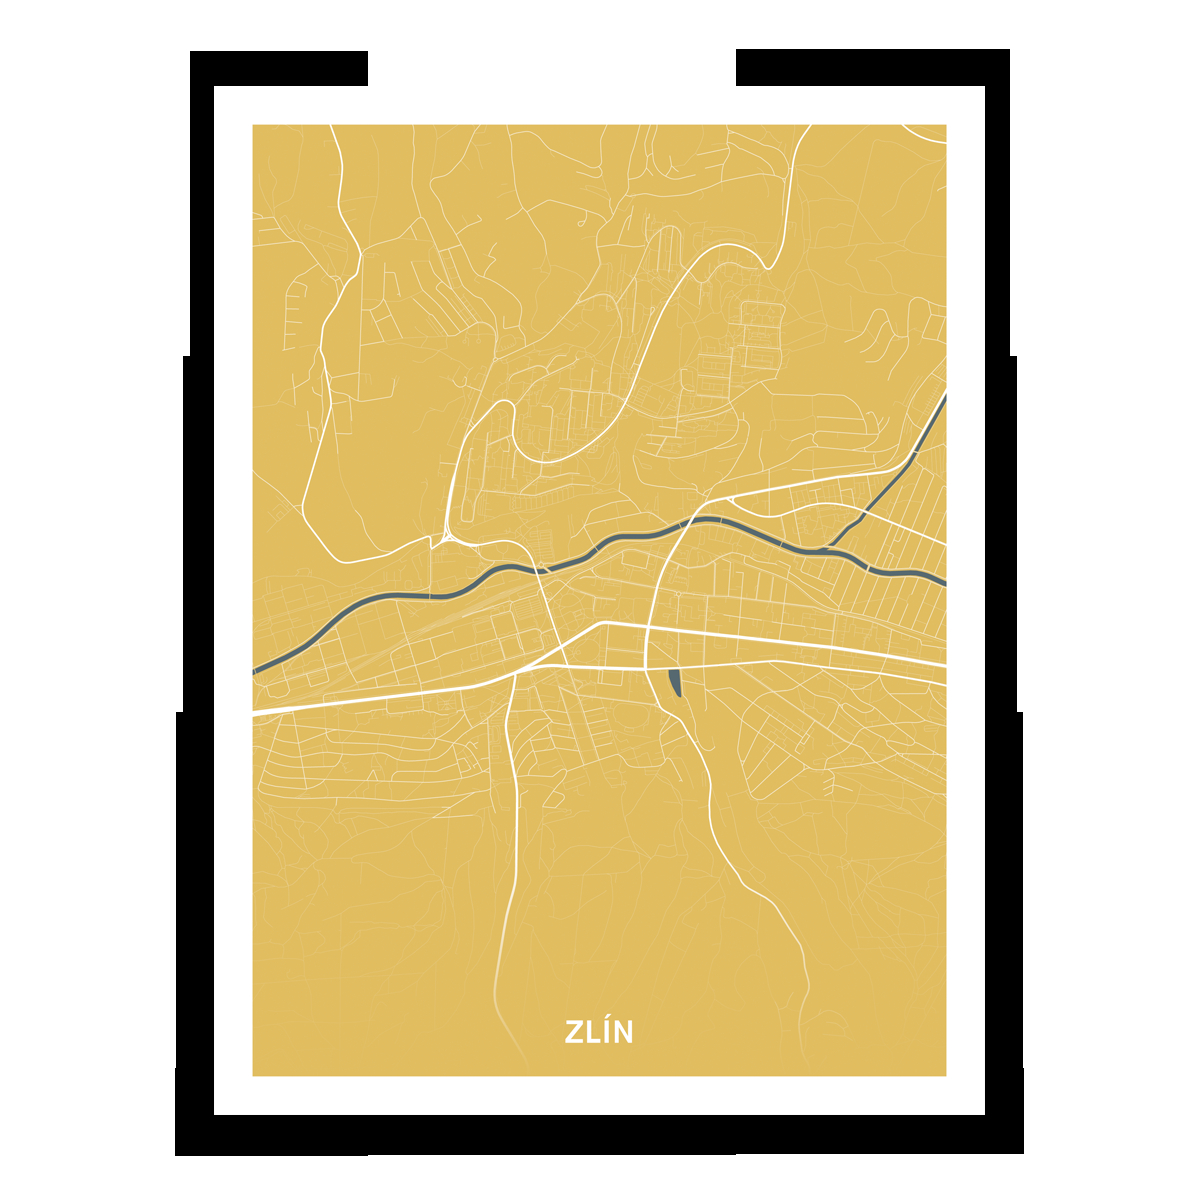 Zlín - road - city - lost map / city - yellow / canvas stretched on frame / 30×40 cm